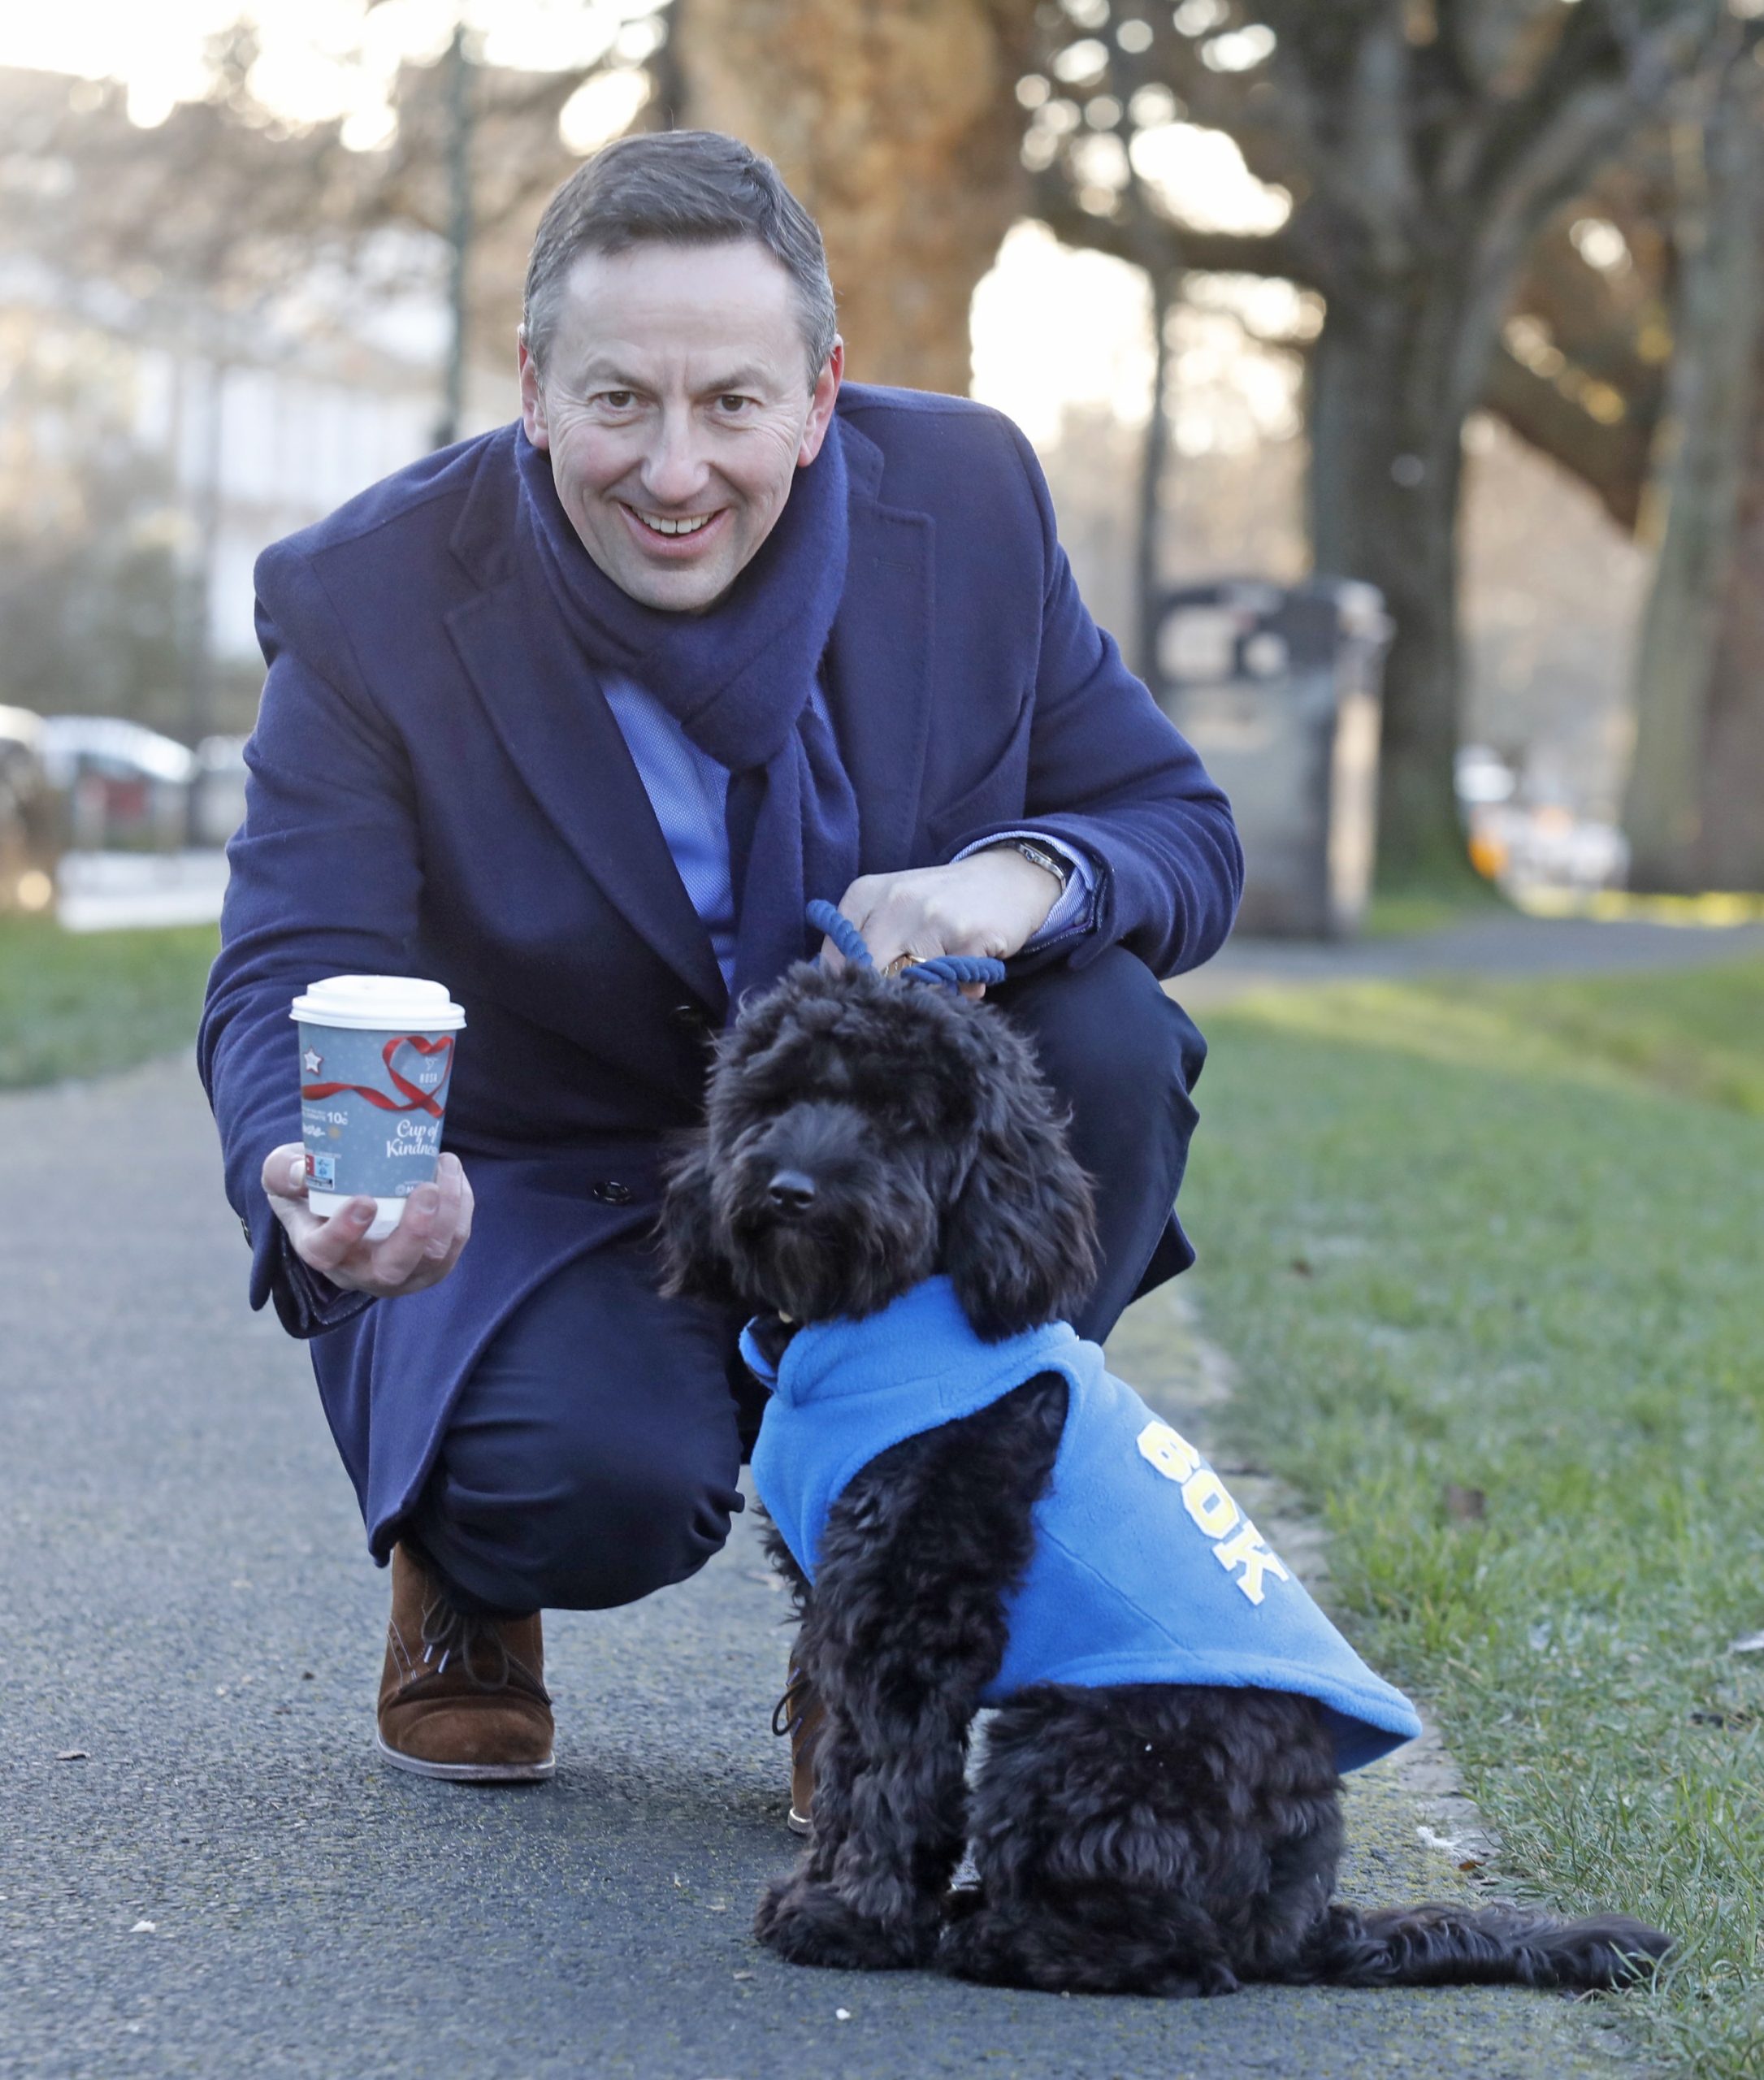 Maxol Christmas Coffee Cup campaign brewed €60K in donations for Aware